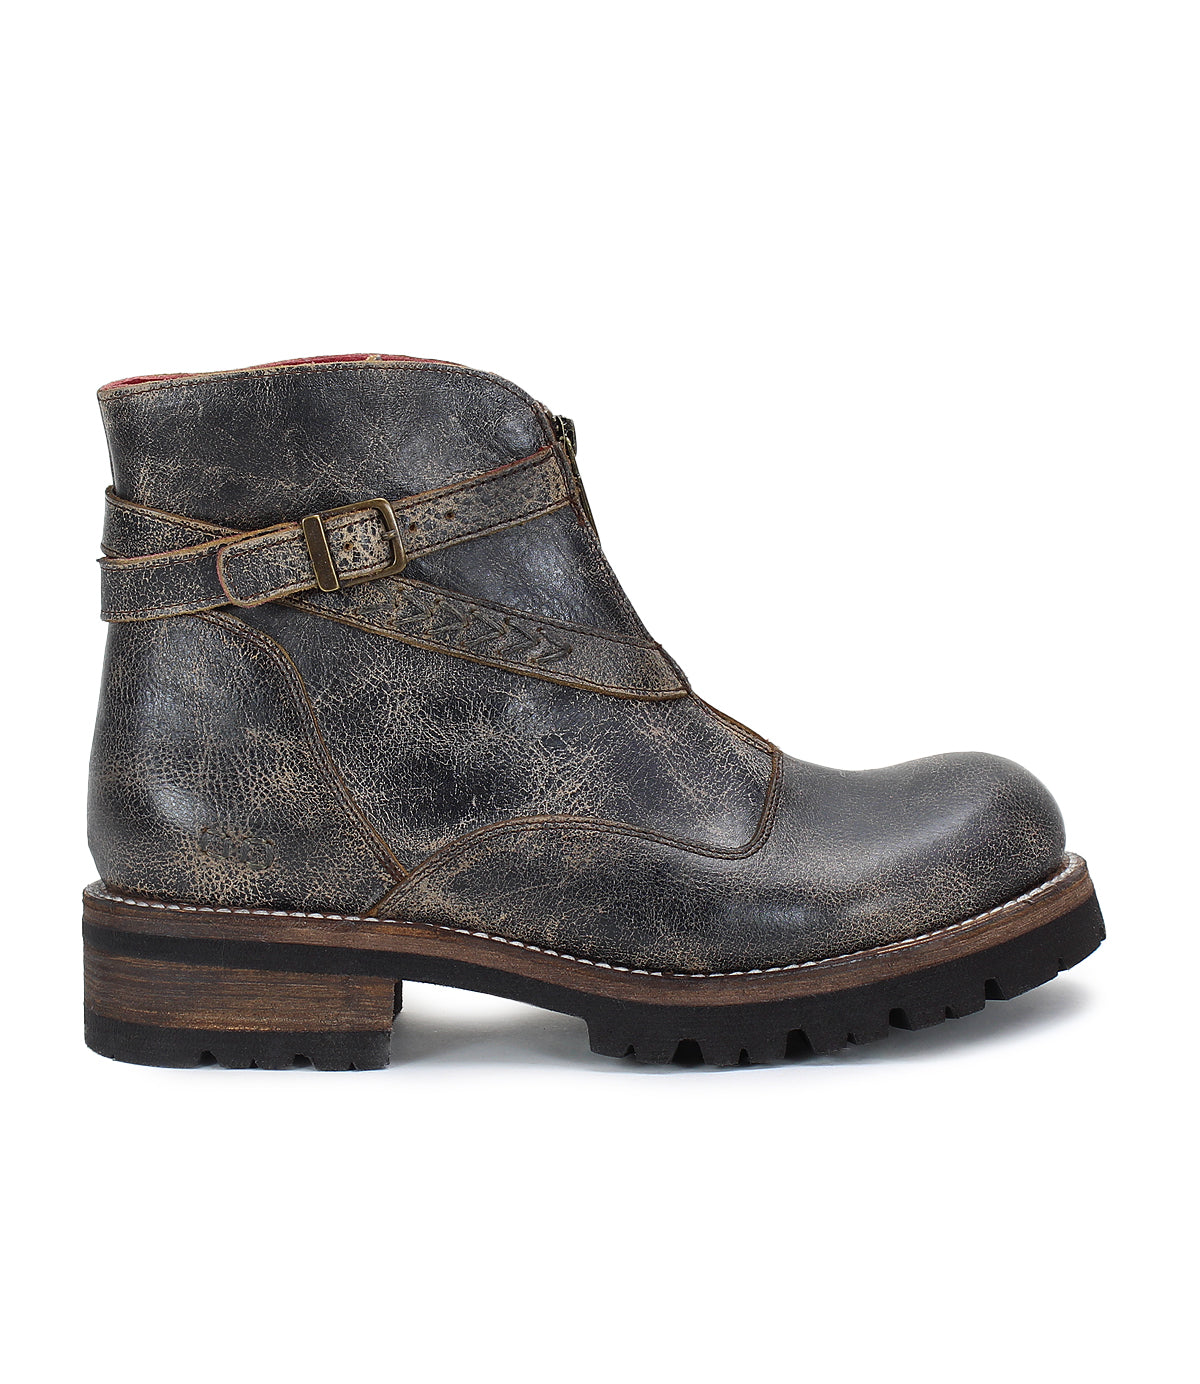 Bed Stu Dessa women's grey leather ankle boots.